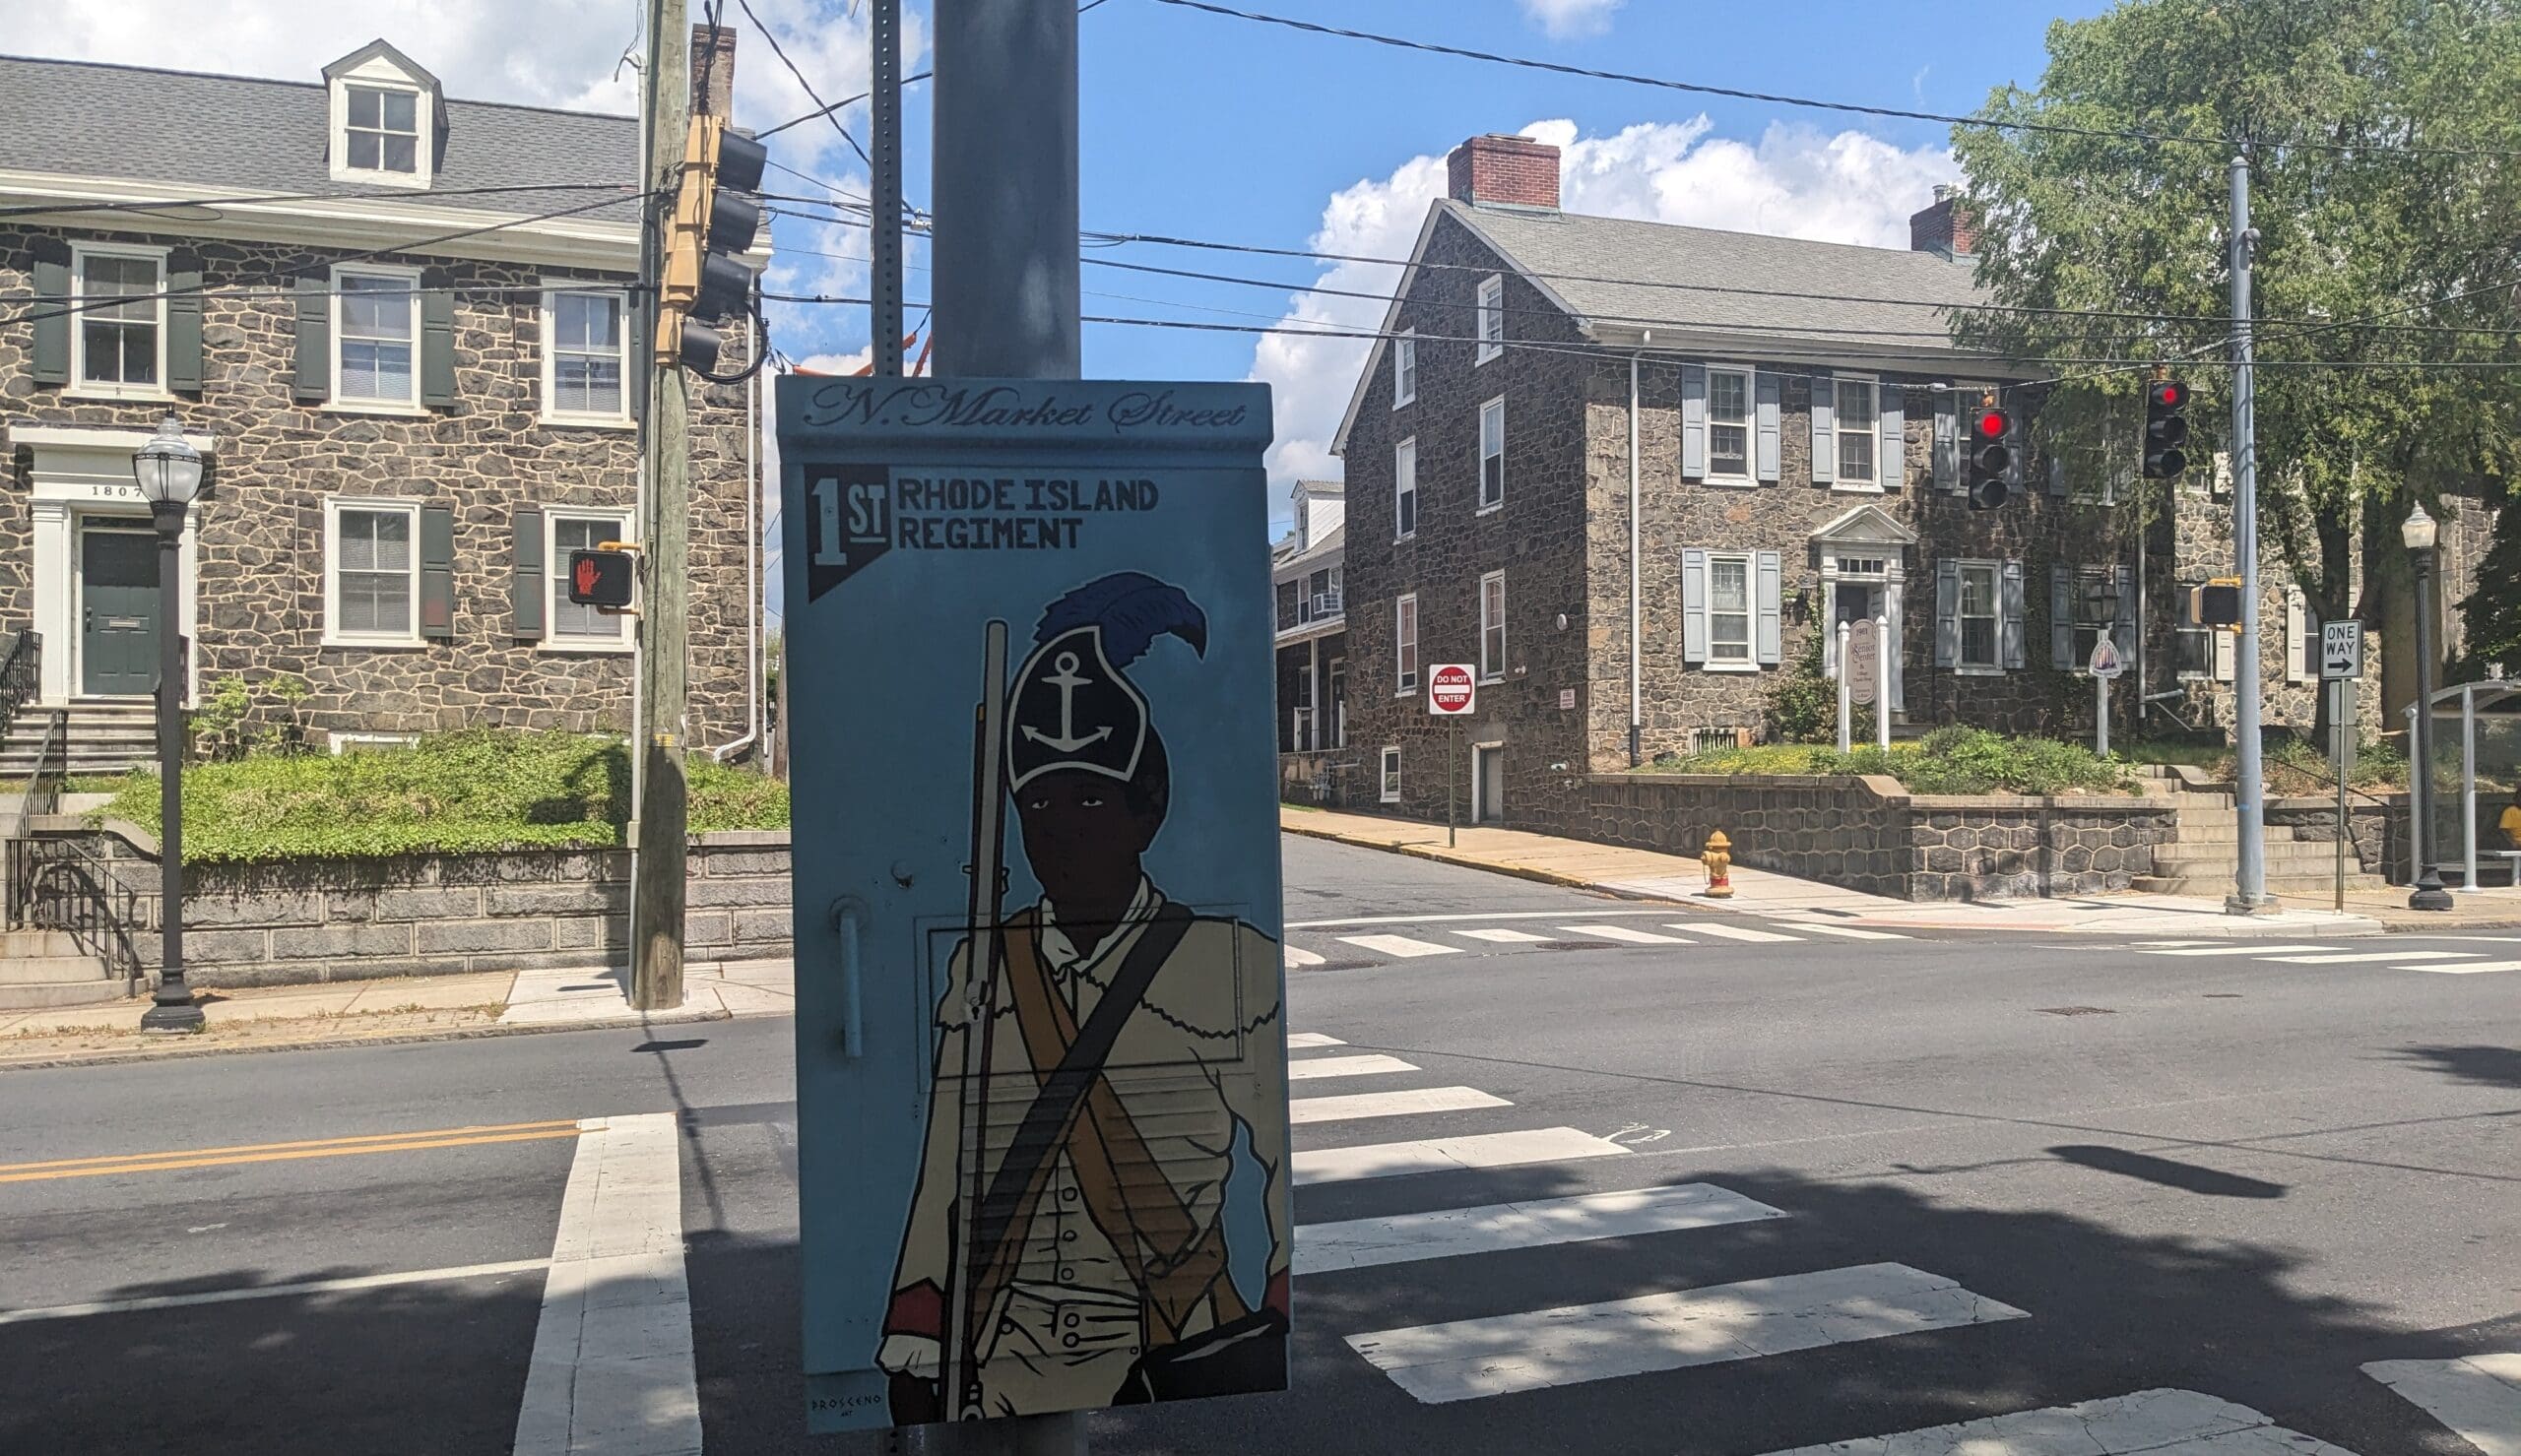 Murals capture “the essence of every culture, often unsung heroes, who contributed to this monumental mission” of American independence, Tigue said. The First Rhode Island Regiment, comprising 300 African American Colonial freedom fighters, marched down Market Street in 1781 and returned in 1782. Ken Mammarella photo.